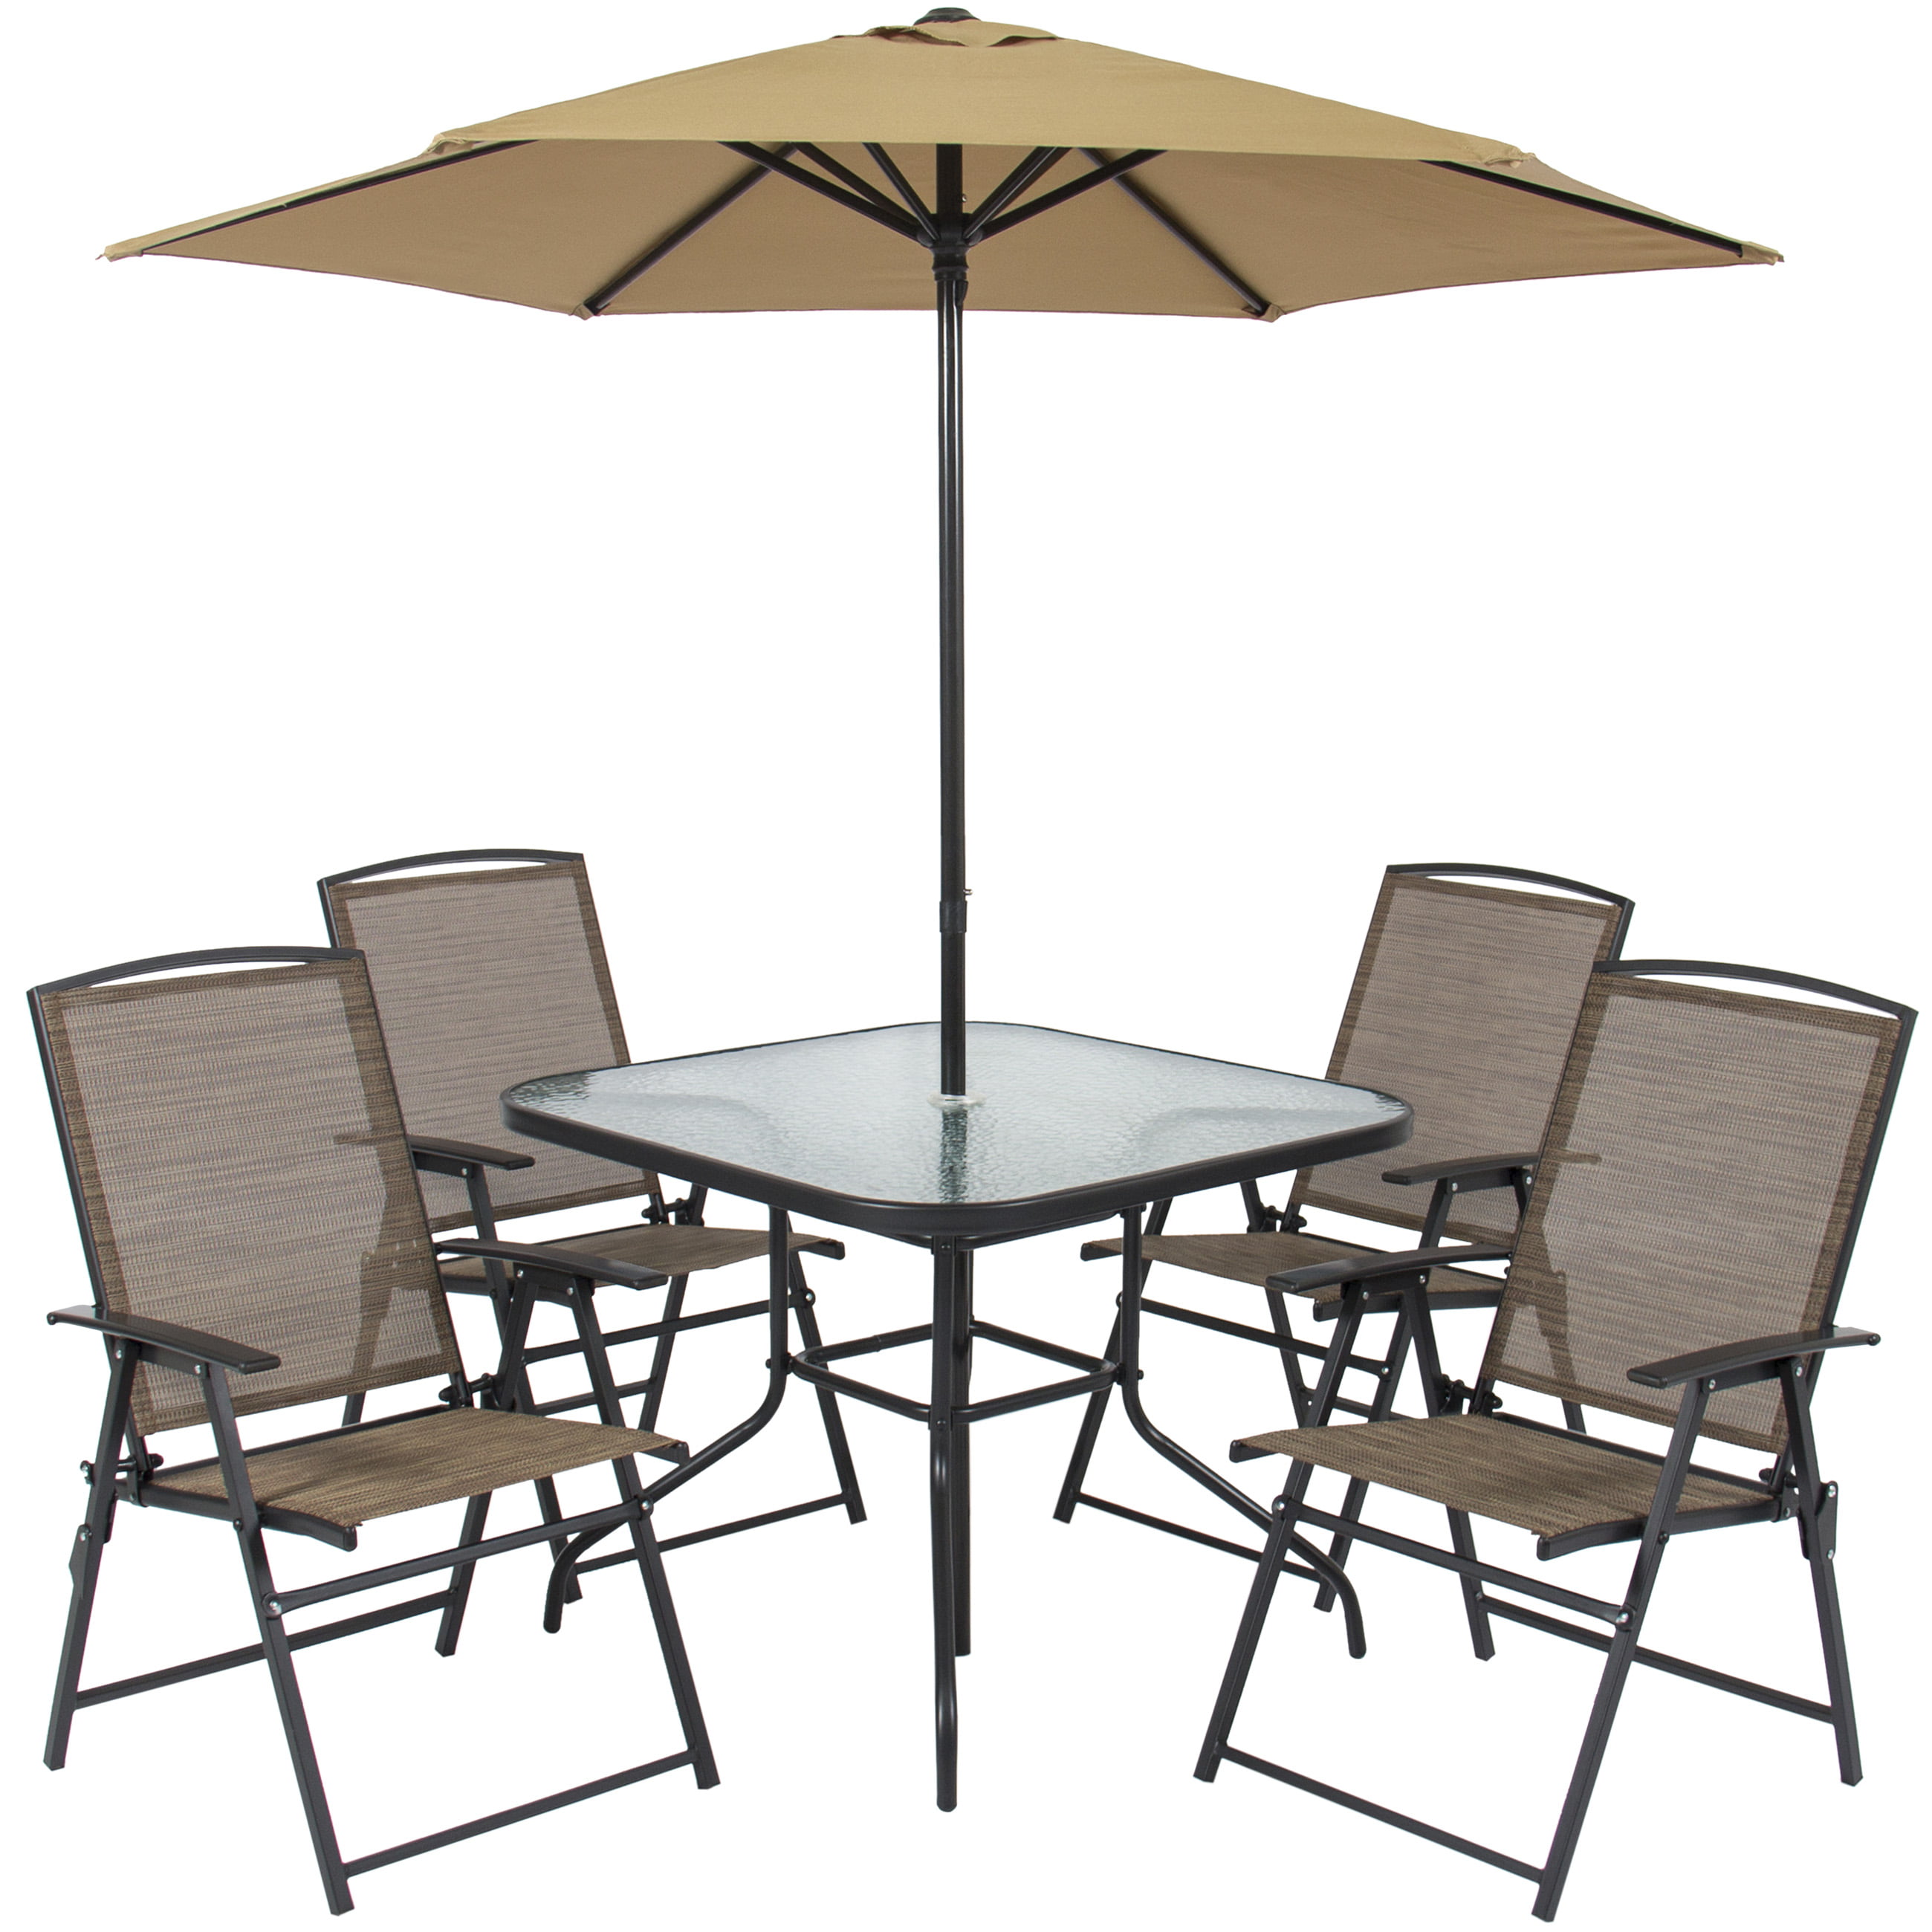 Best Choice Products 6-Piece Outdoor Folding Patio Dining Set w/ Table